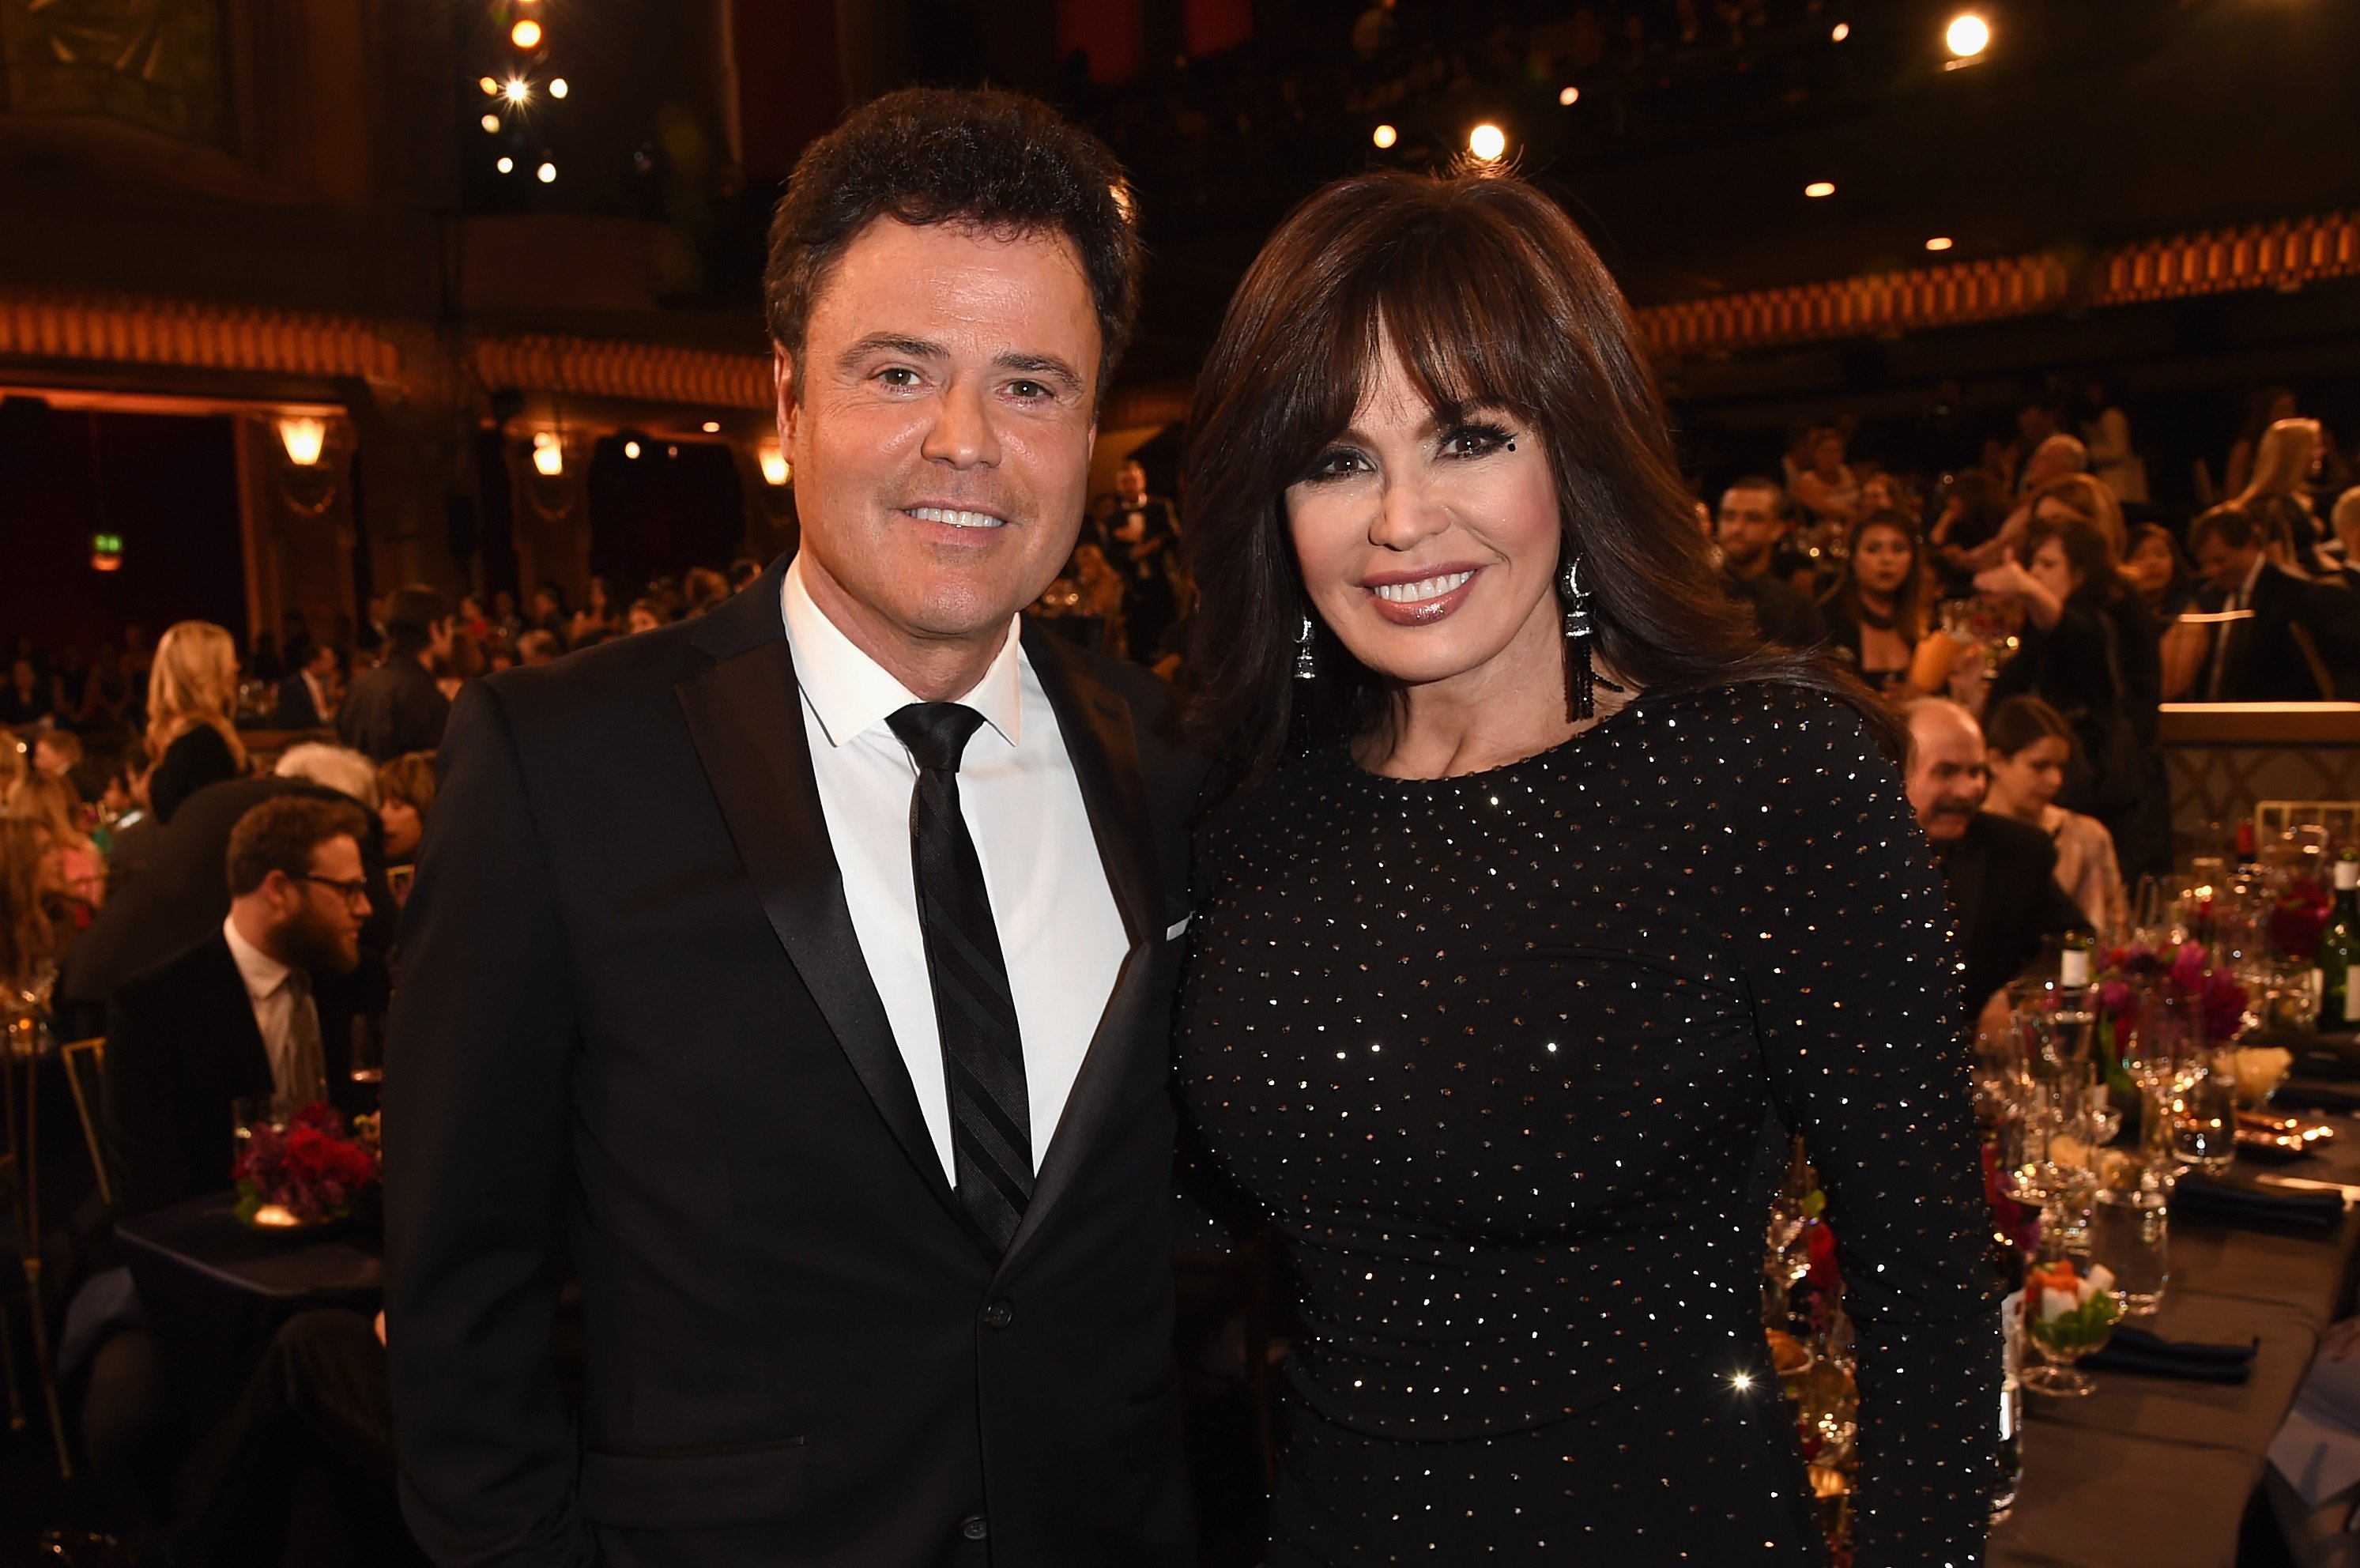 Donny Osmond and Marie Osmond attend the TV Land Awards on April 11, 2015, in Beverly Hills, California. | Source: Getty Images.